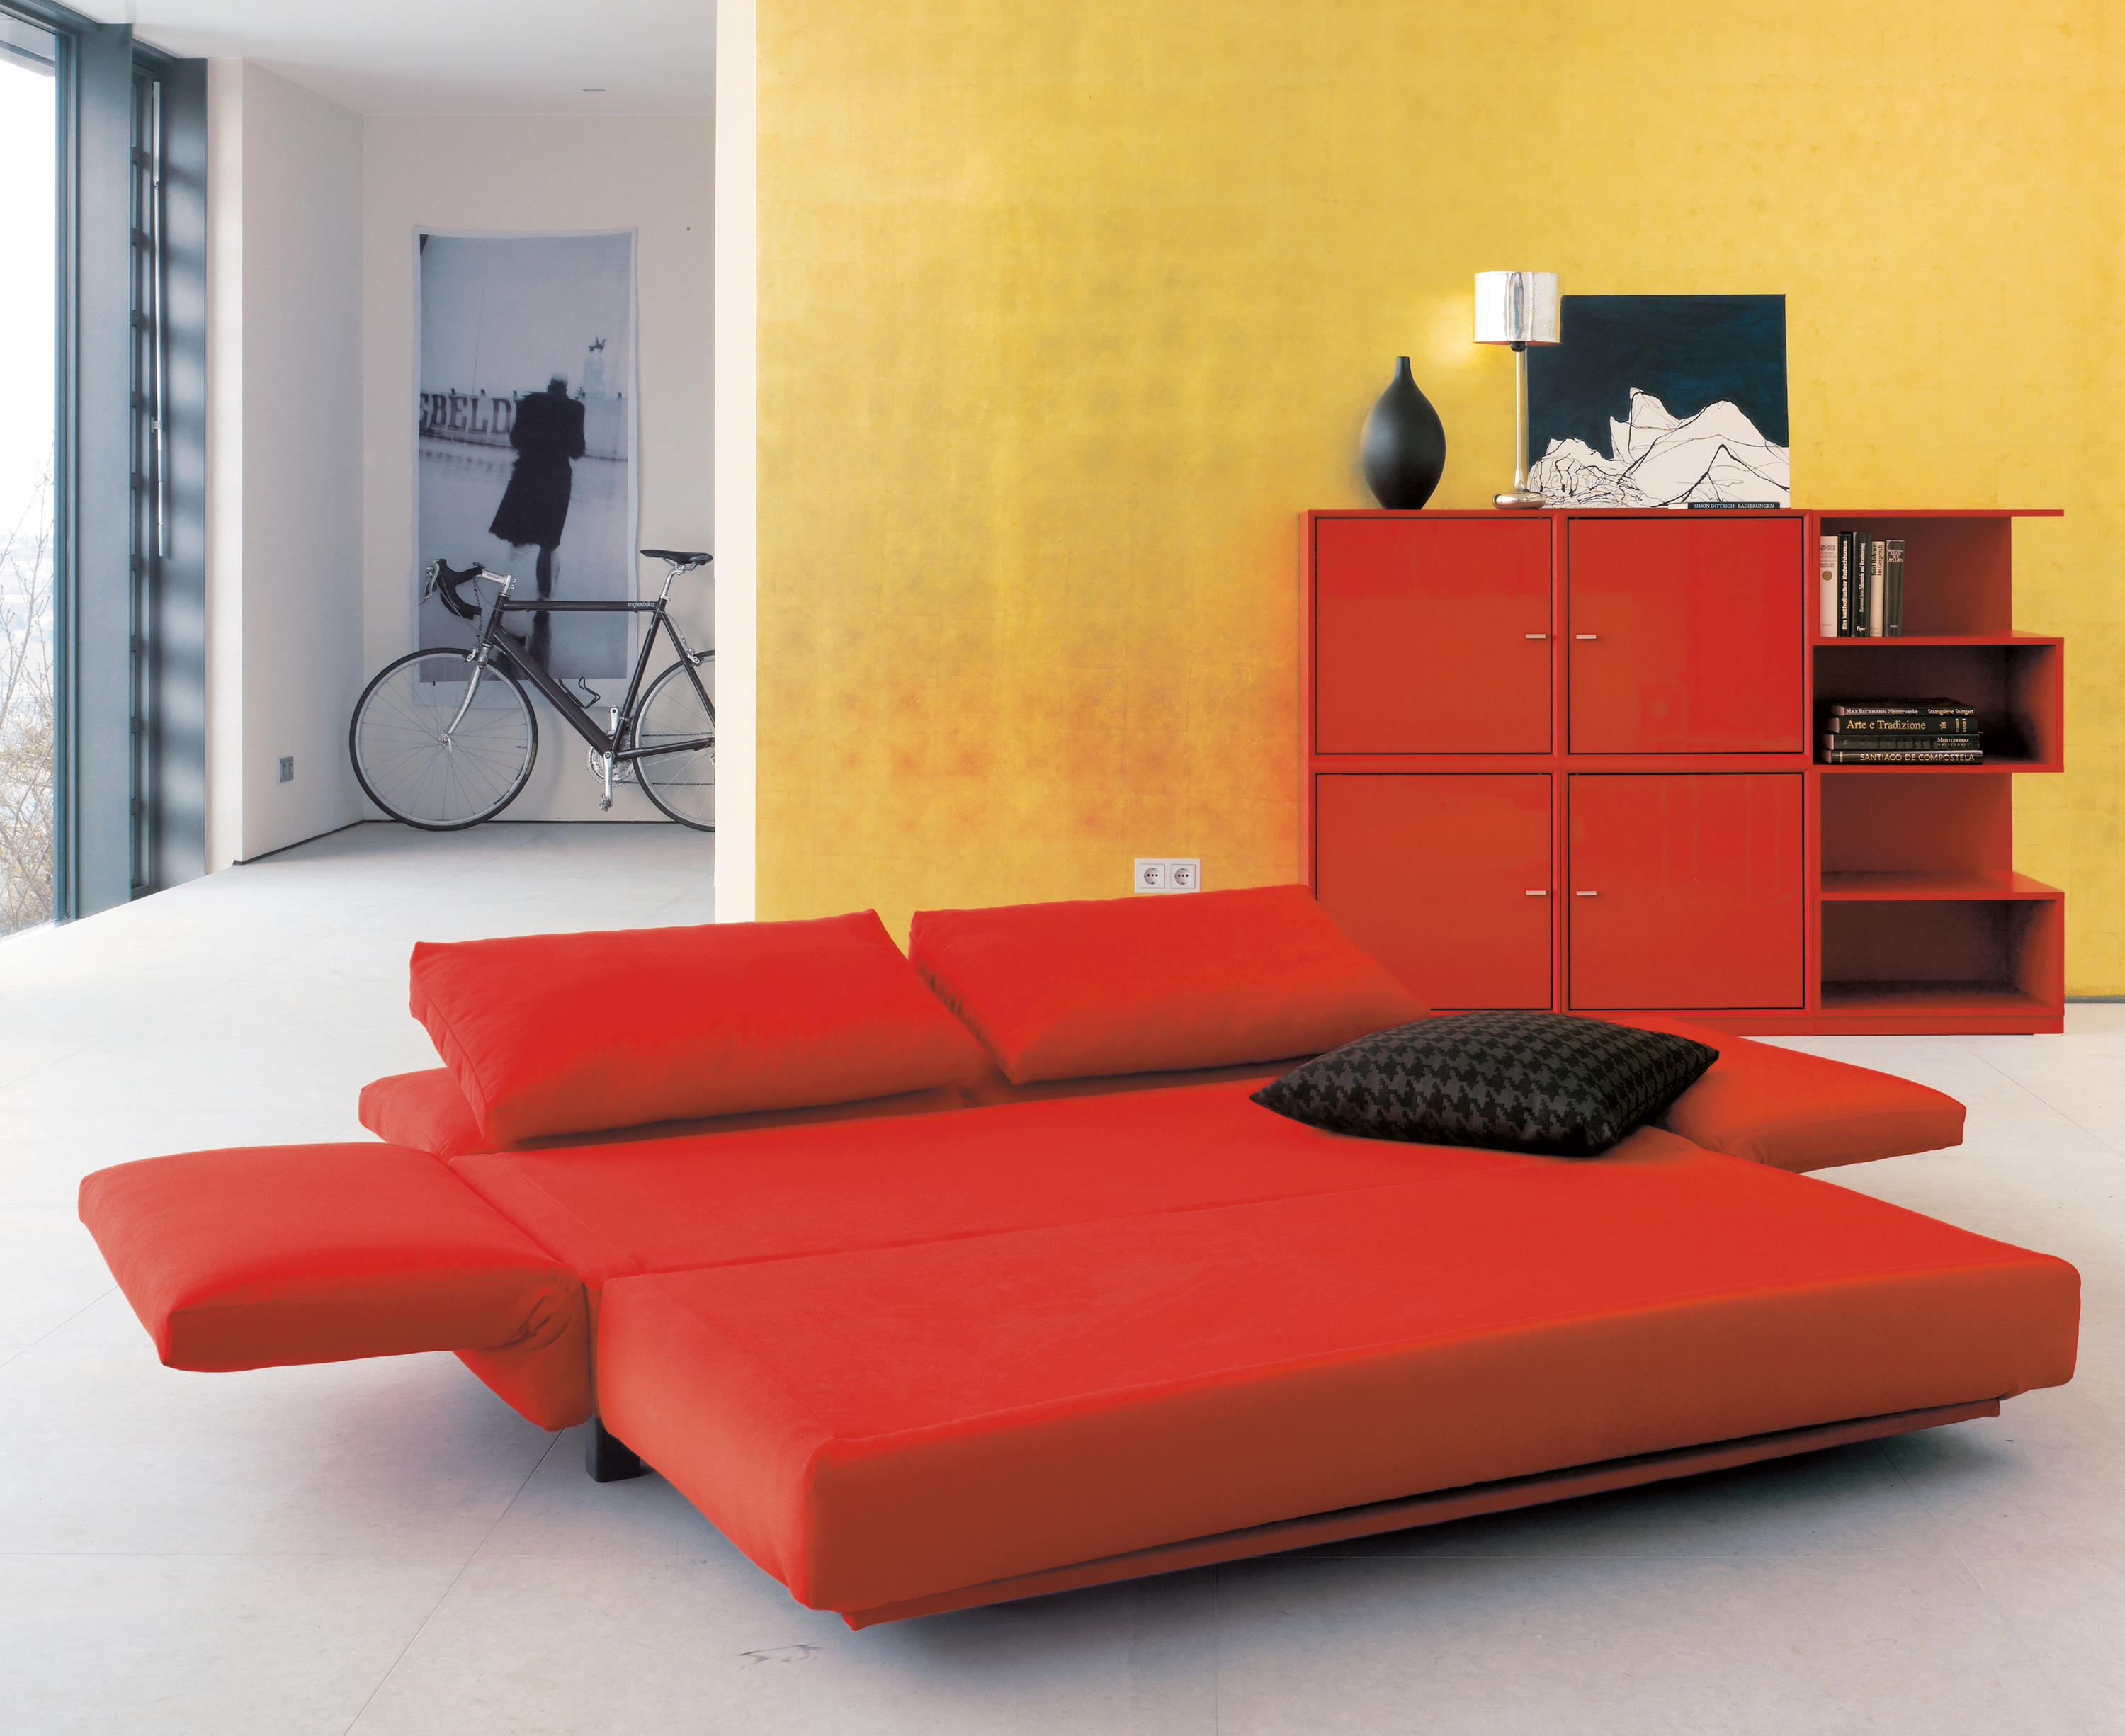 die collection sofa bed